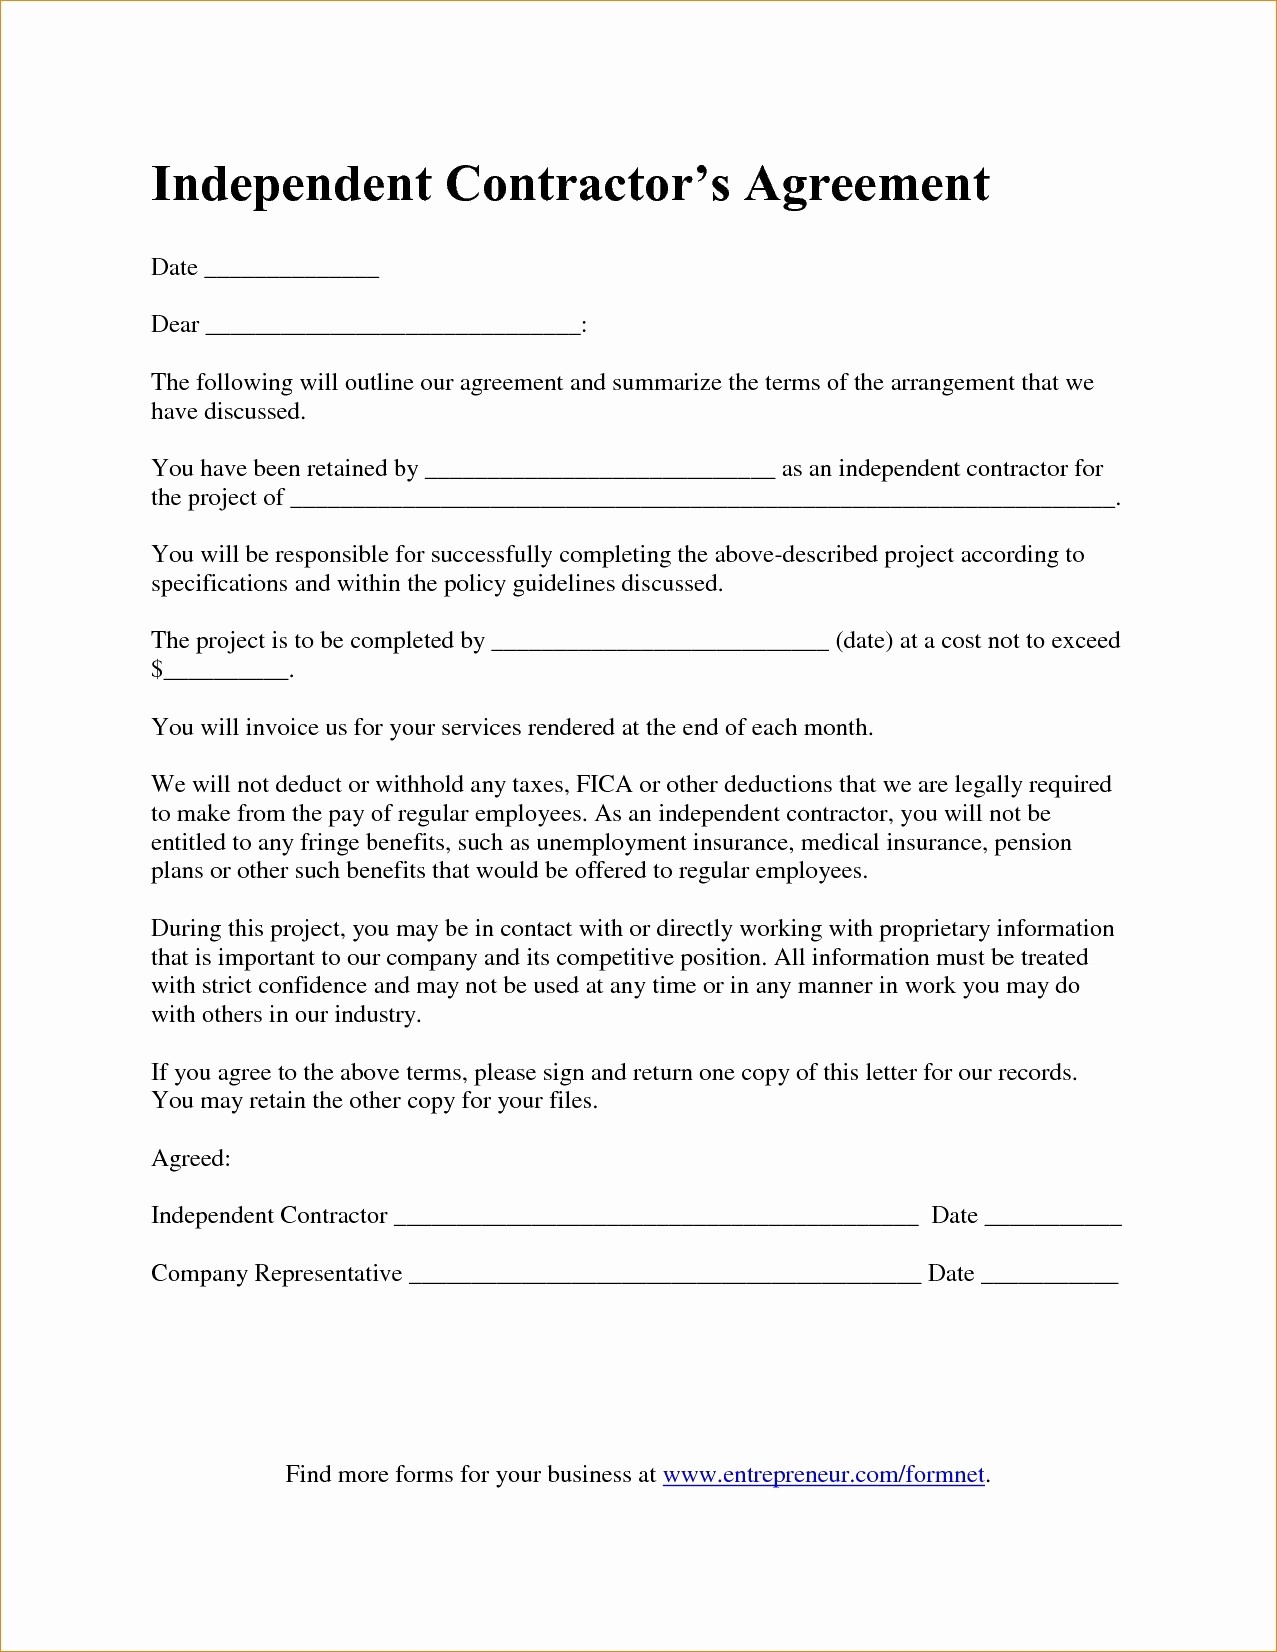 Independent Contractor Agreement For Programming Services Awesome 50